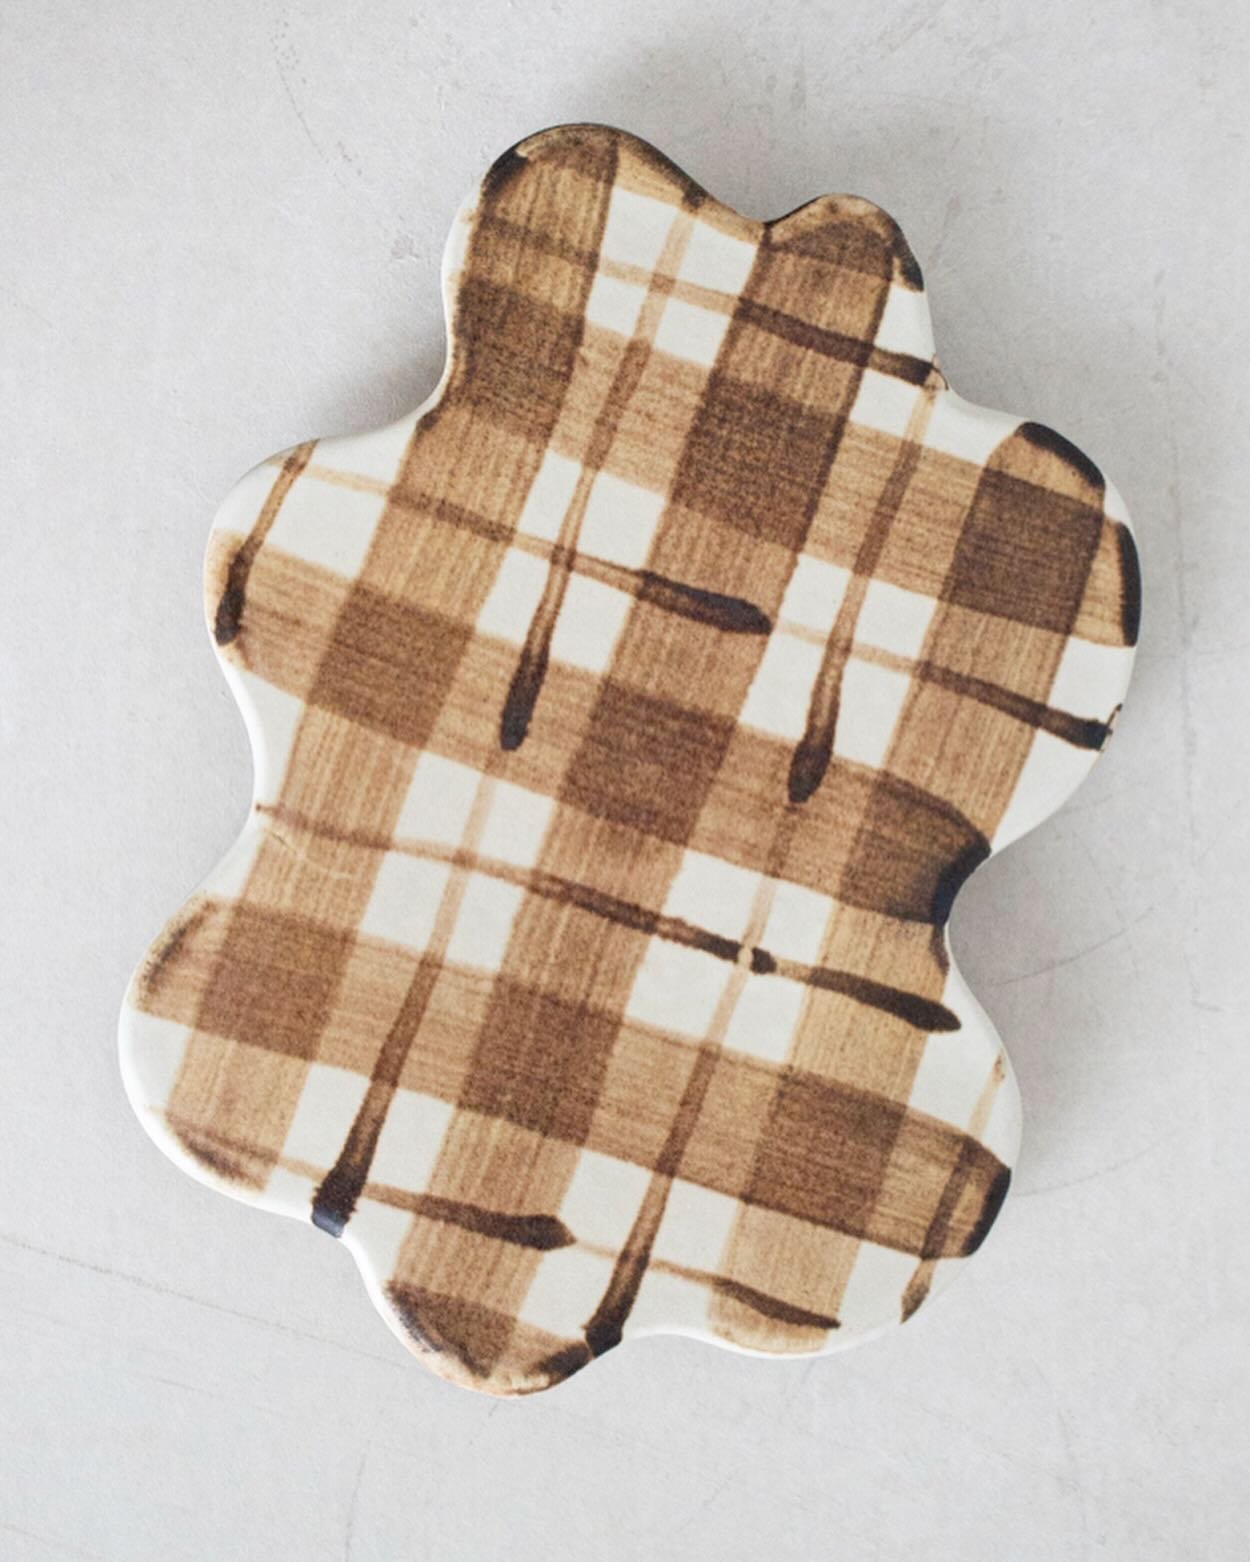 Serving platter with checkered pattern. Delicious to serve food on or to hang amongst your posters and paintings on the wall 🤎 

SOLD